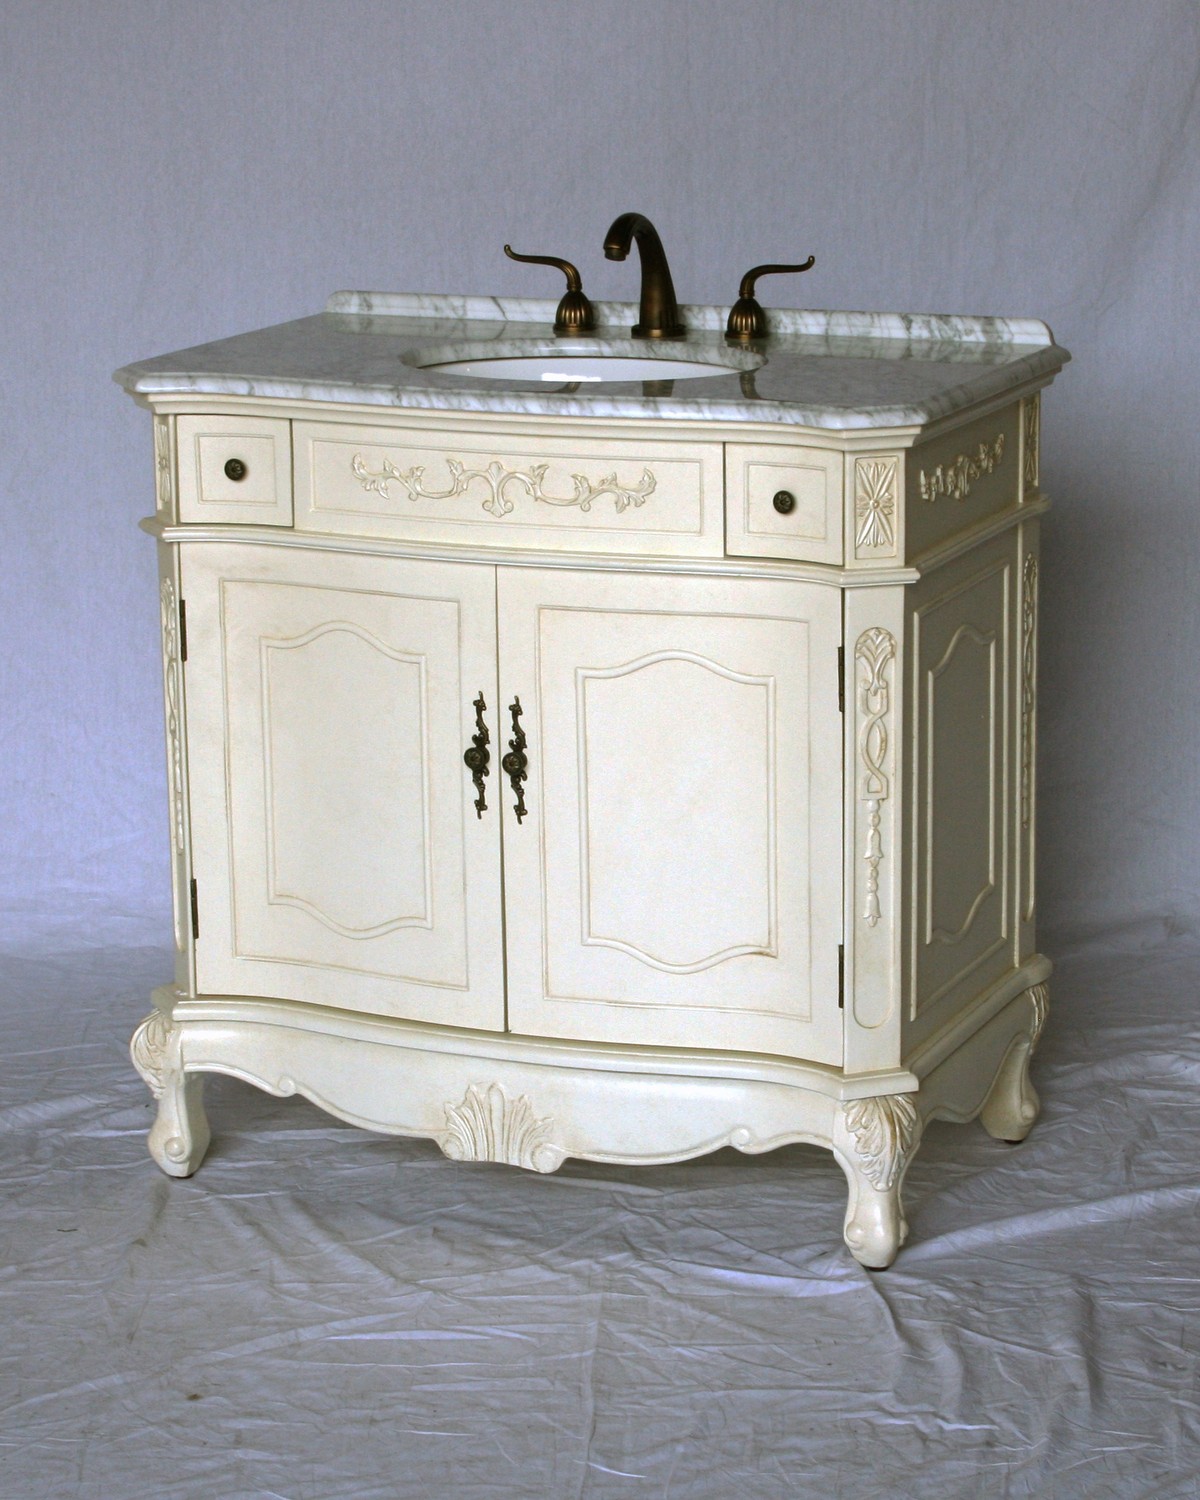 36" Adelina Antique Style Single Sink Bathroom Vanity in Antique White Finish with White Italian Carrara Marble Countertop